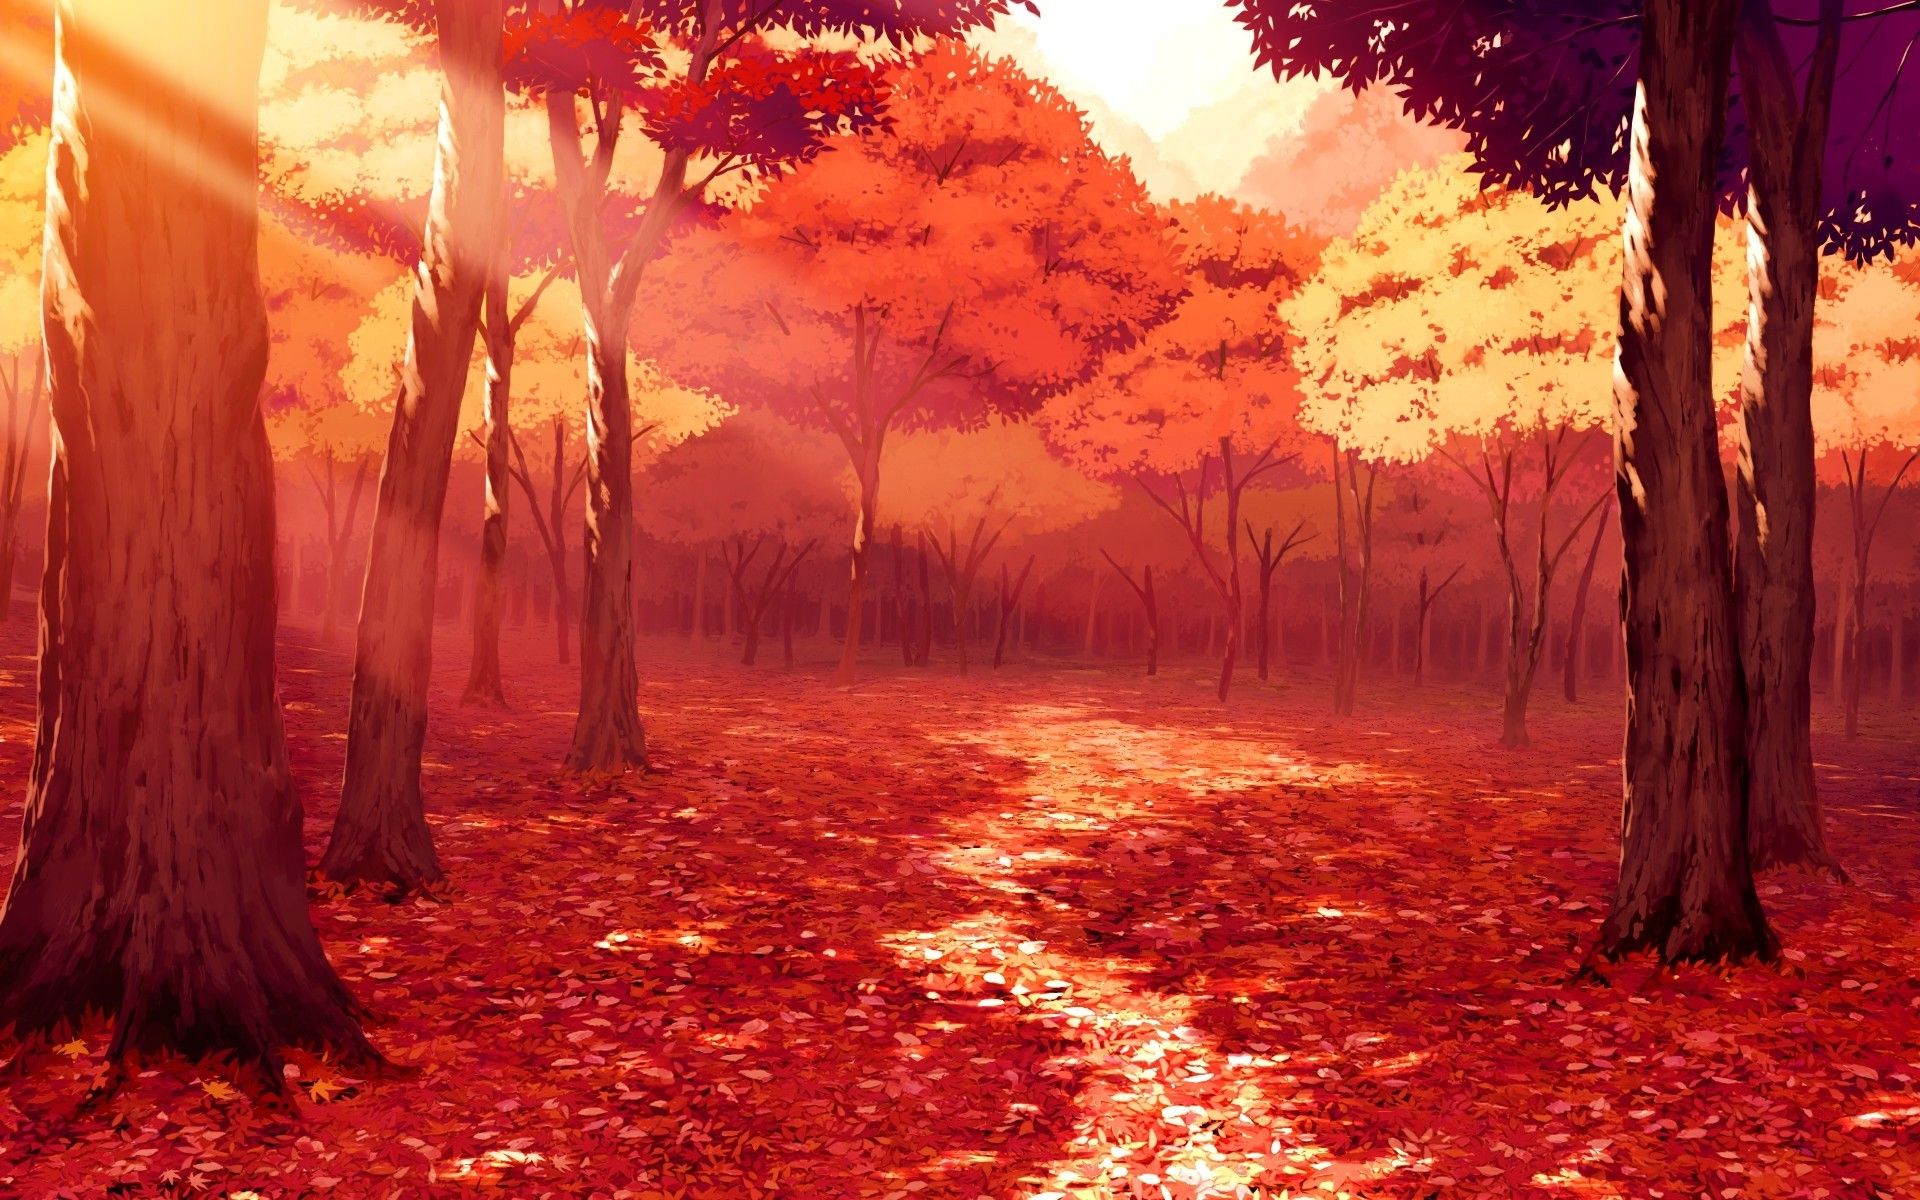 drawing, Artwork, Fall, Leaves, Sunlight, Forest, Red, Anime